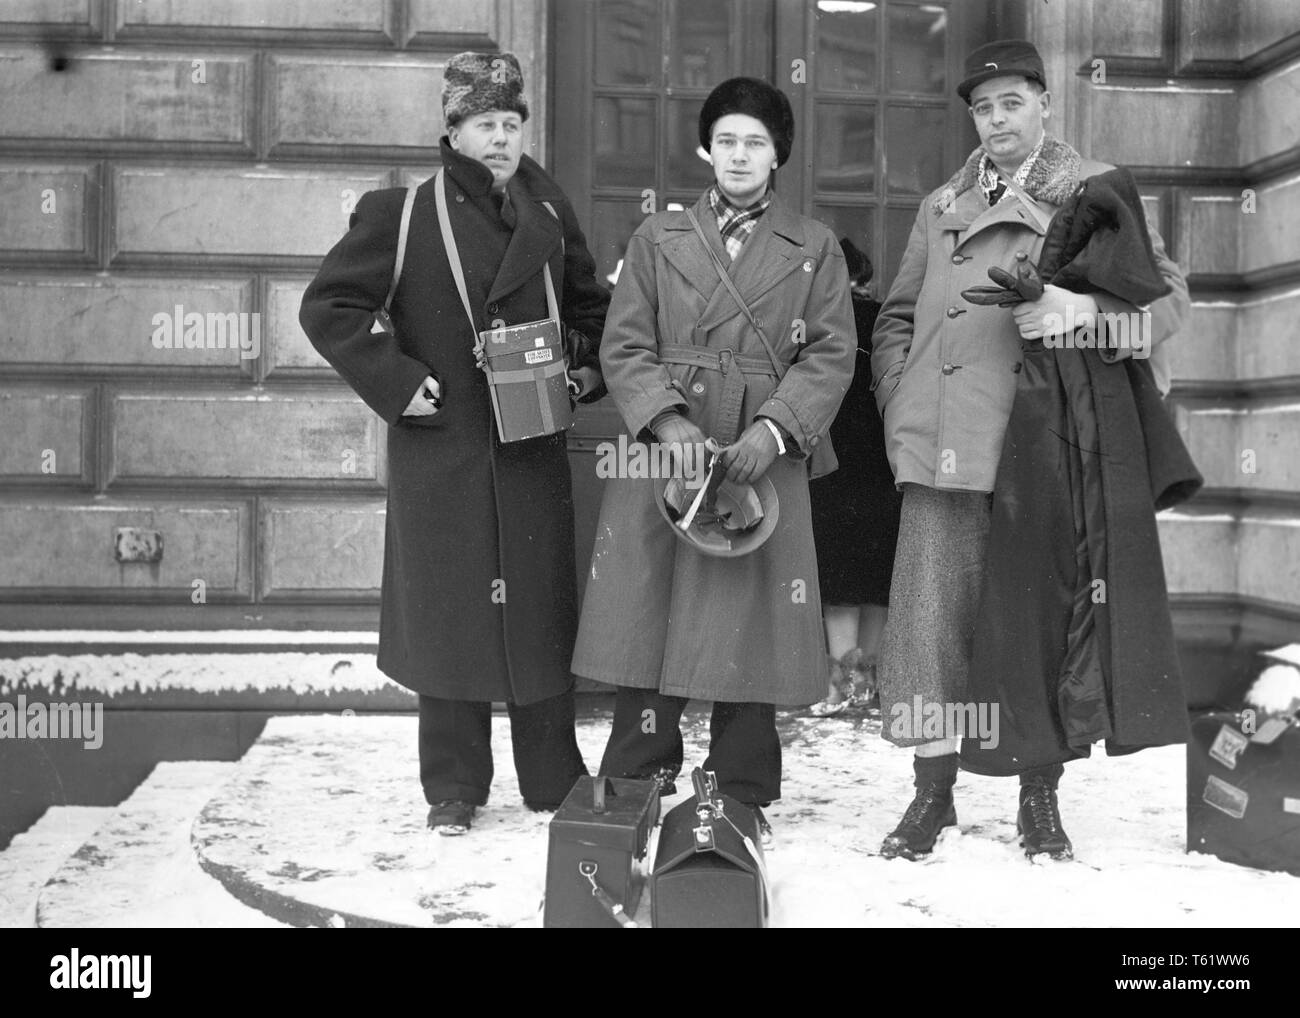 The Winter War. A military conflict between the Soviet union and Finland. It began with a Soviet invasion on november 1939 when Soviet infantery crossed the border on the Karelian Isthmus. Pictured photographer KG Kristoffersson back in Stockholm having returned from Finland.  With newspaper journalists Gunnar Müller from Aftonbladet and Karl-Olof Hedström from Stockholmstidningen.  January 1940. Photo Kristoffersson ref 100-7-2 Stock Photo